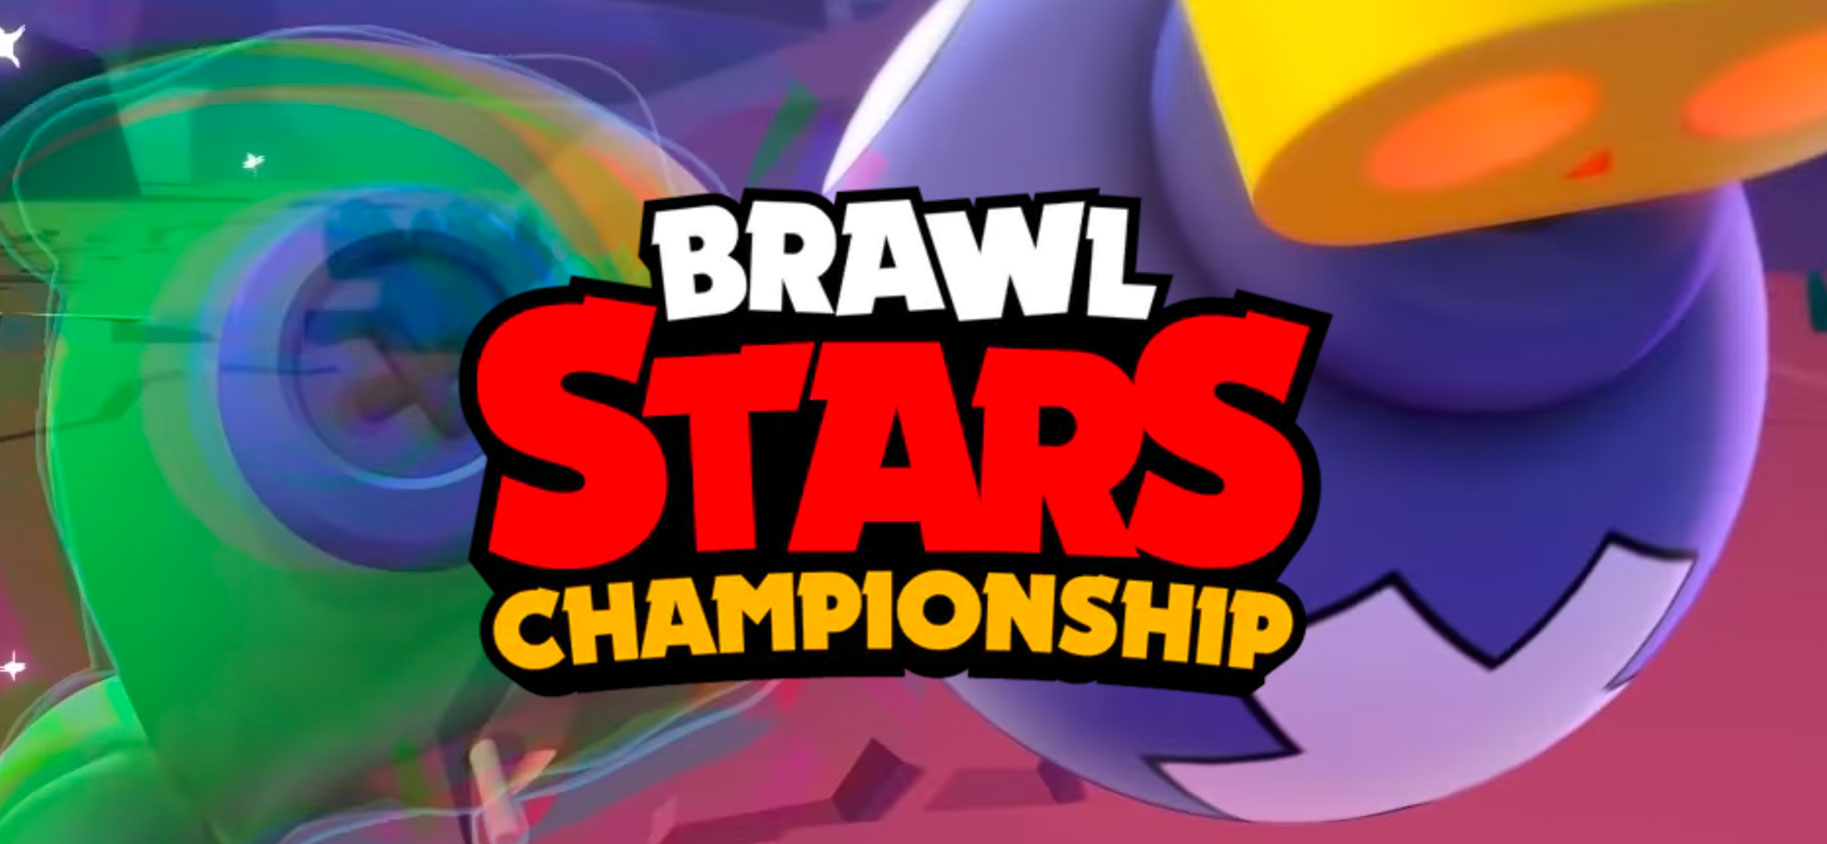 Update on the qualifiers for the Brawl Stars World Finals